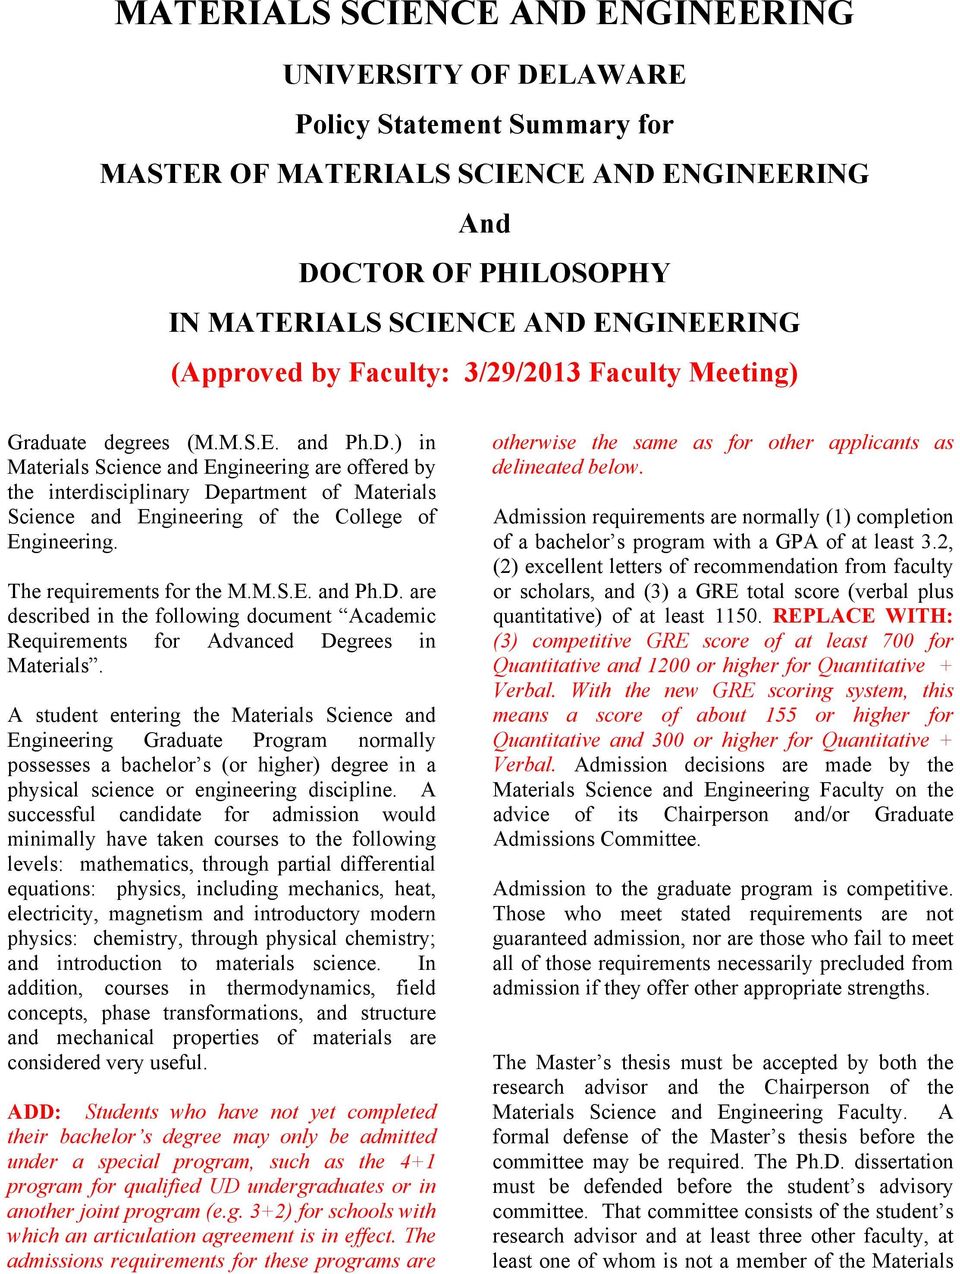 ) in Materials Science and Engineering are offered by the interdisciplinary Department of Materials Science and Engineering of the College of Engineering. The requirements for the M.M.S.E. and Ph.D. are described in the following document Academic Requirements for Advanced Degrees in Materials.